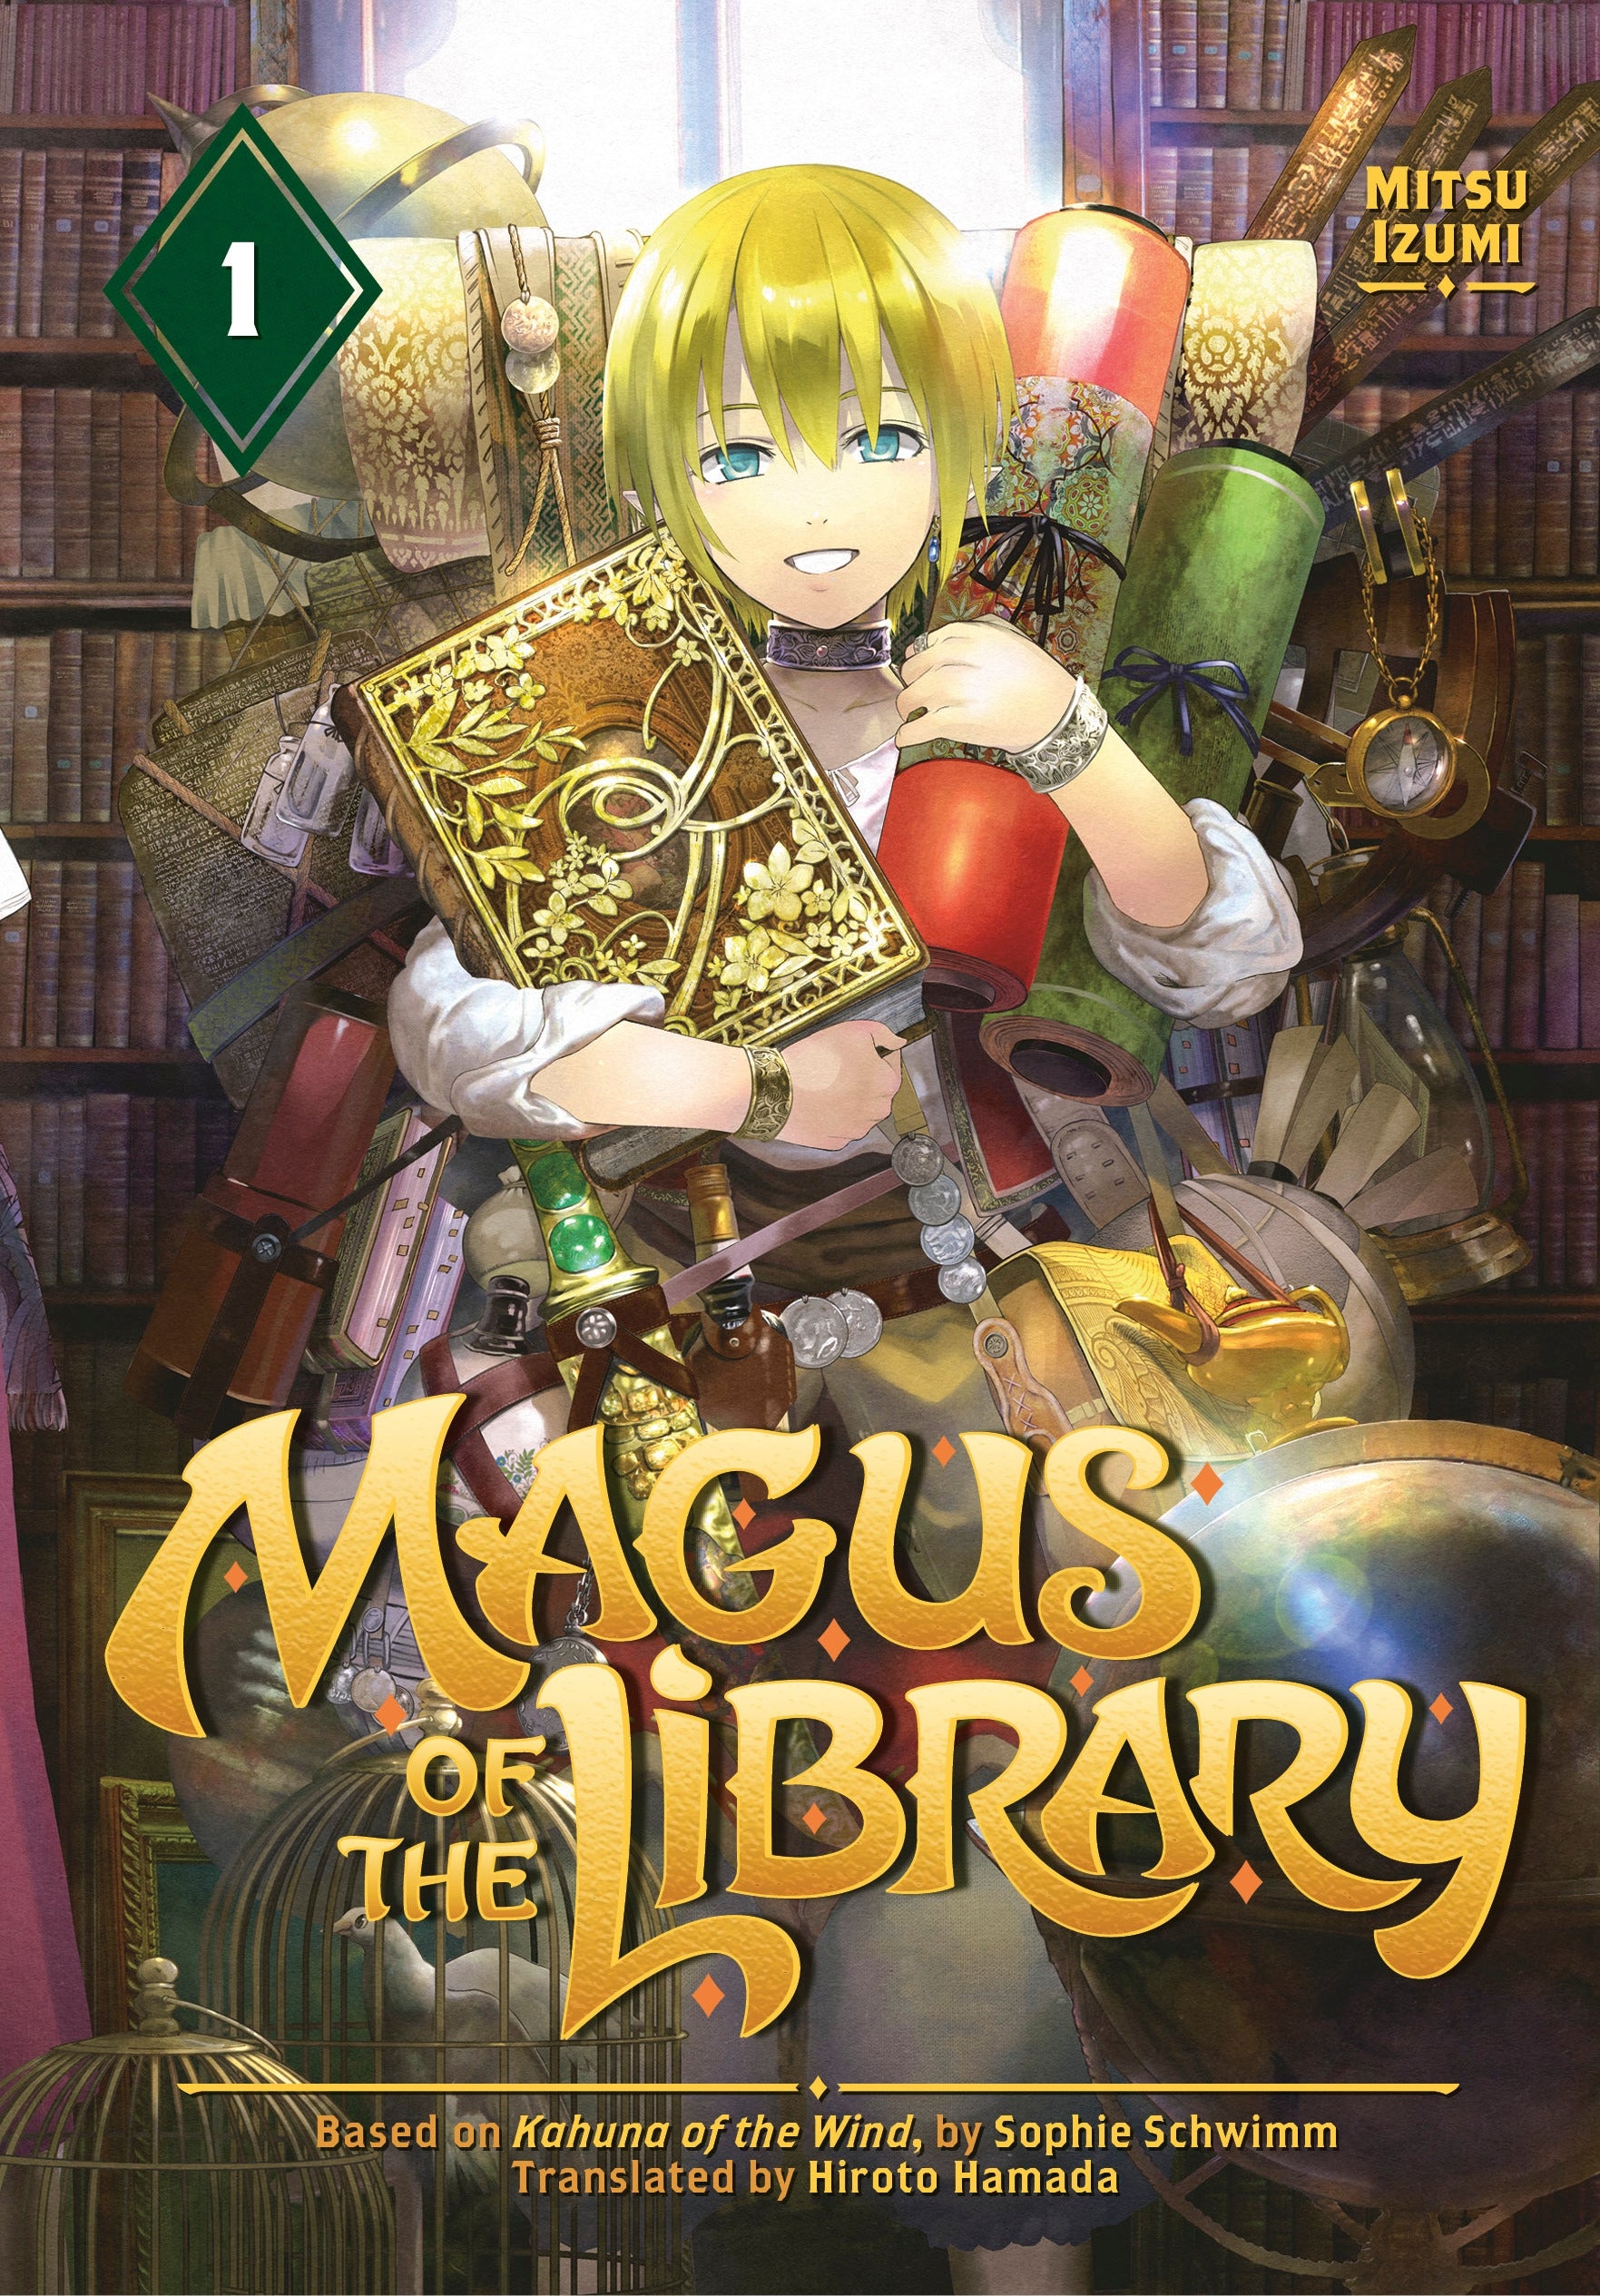 Magus of the Library, Vol. 1